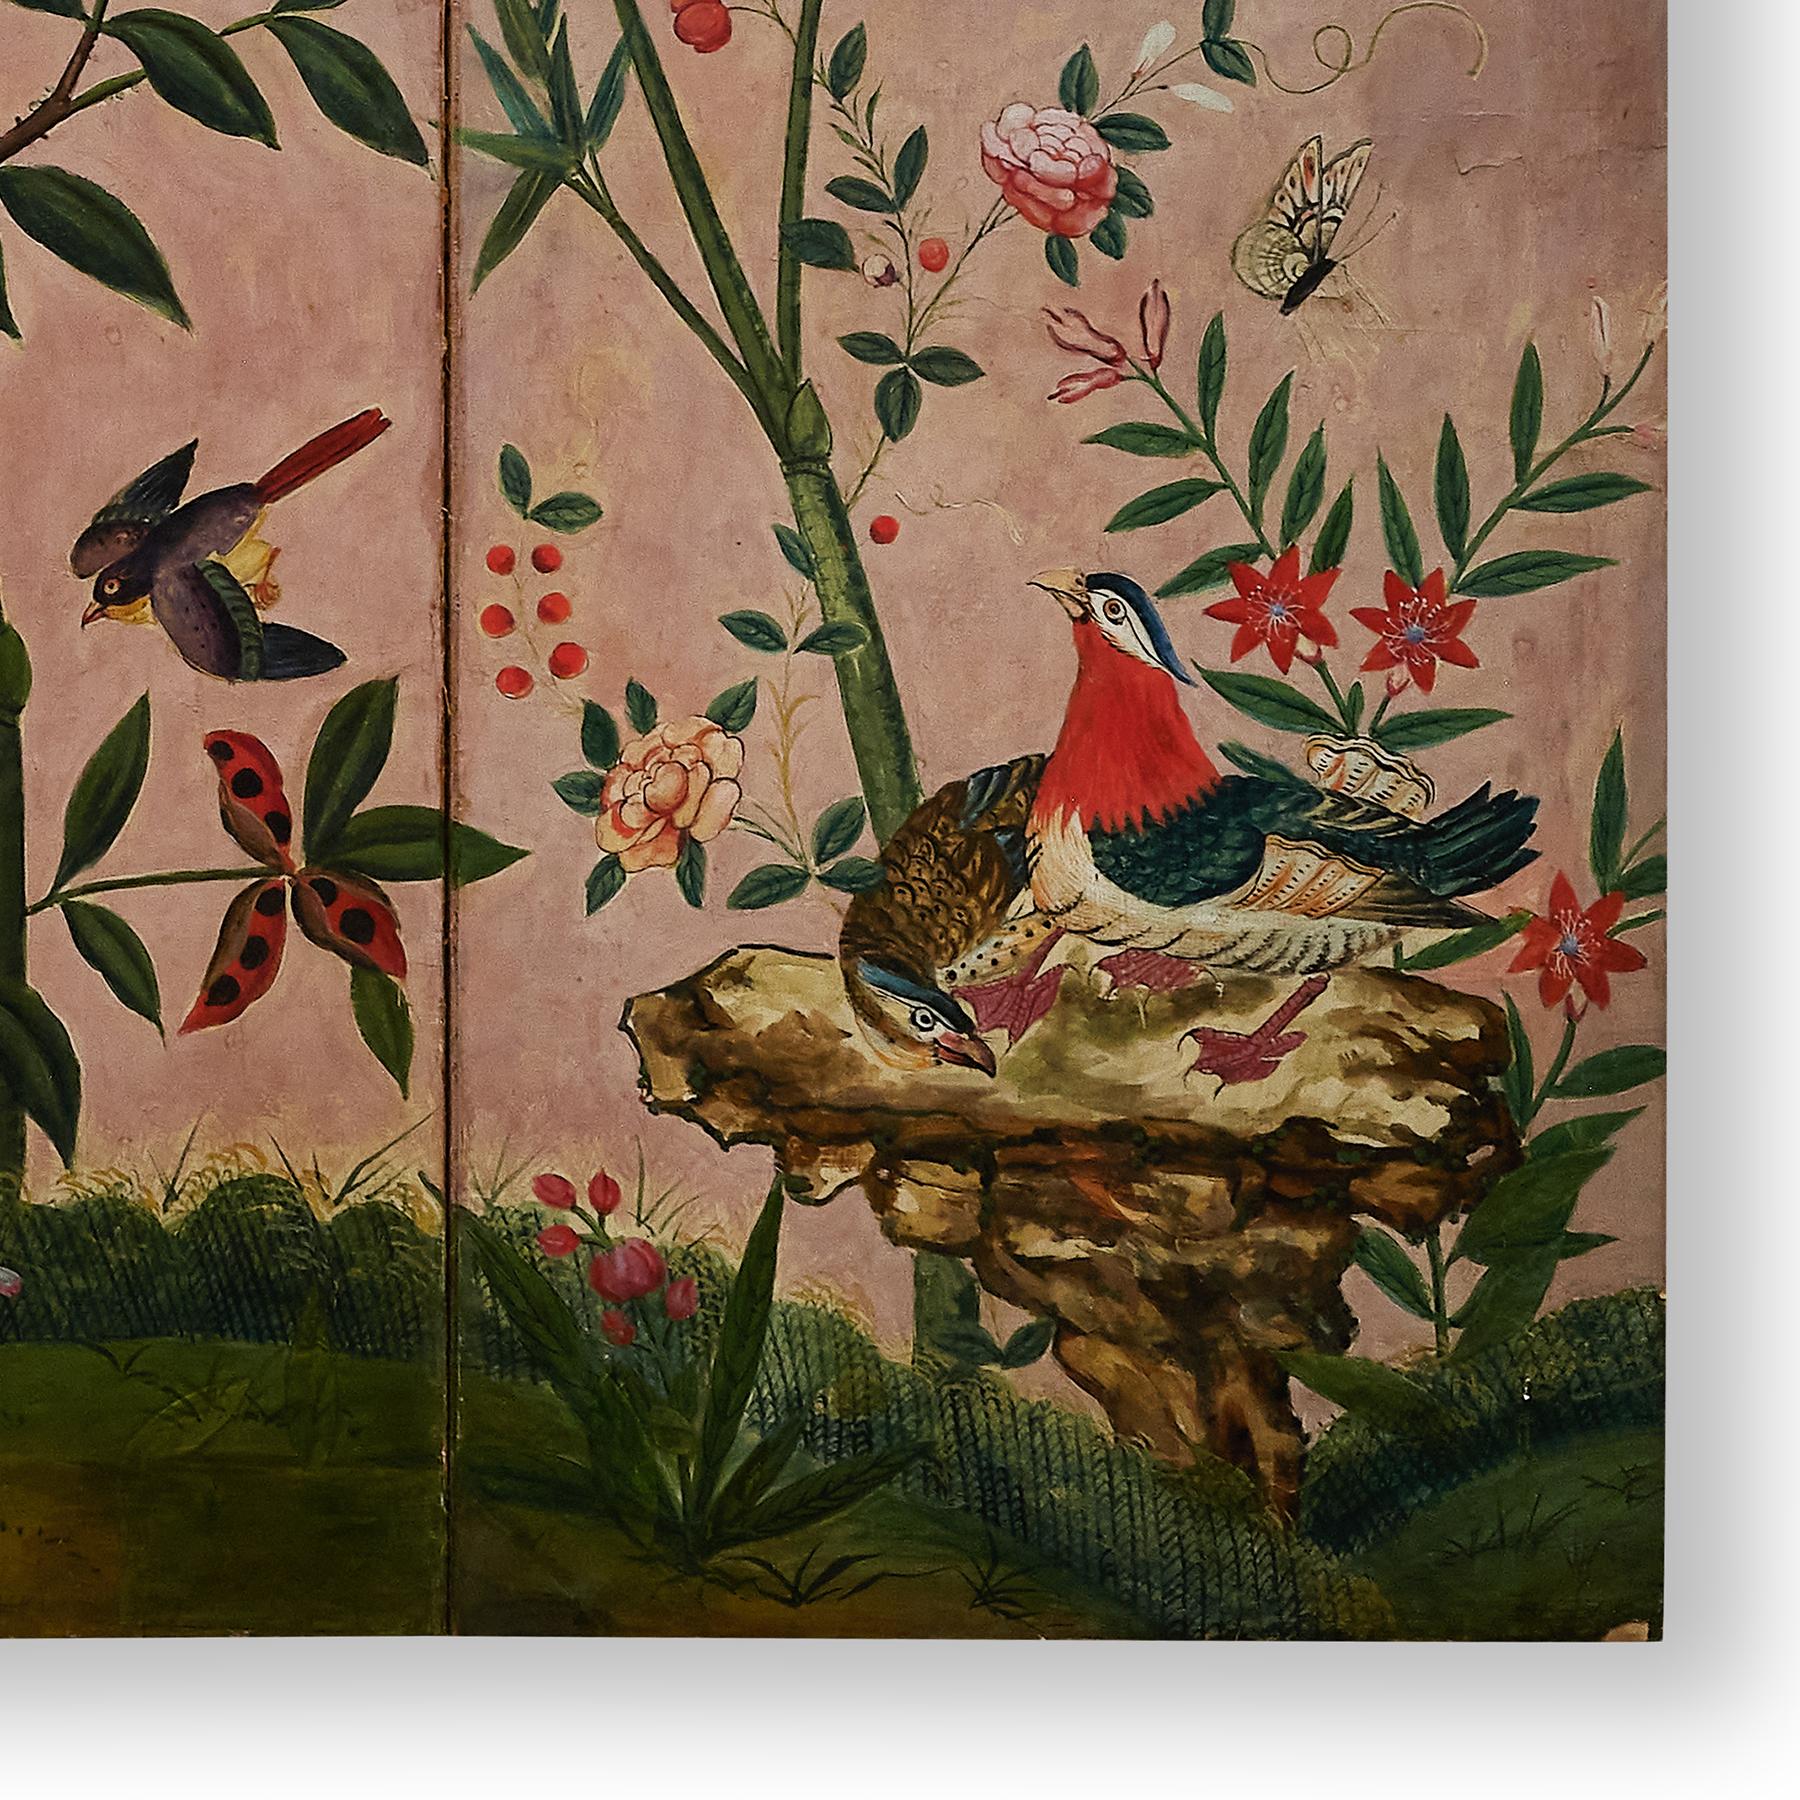 An impressive six-panel Chinese wallpaper (hand-painted tempura) decoupage screen, the wallpaper dating to the late 18th or early 19th century. The screen depicts a garden scene with roosters and pheasants, their feathers depicted with a range of